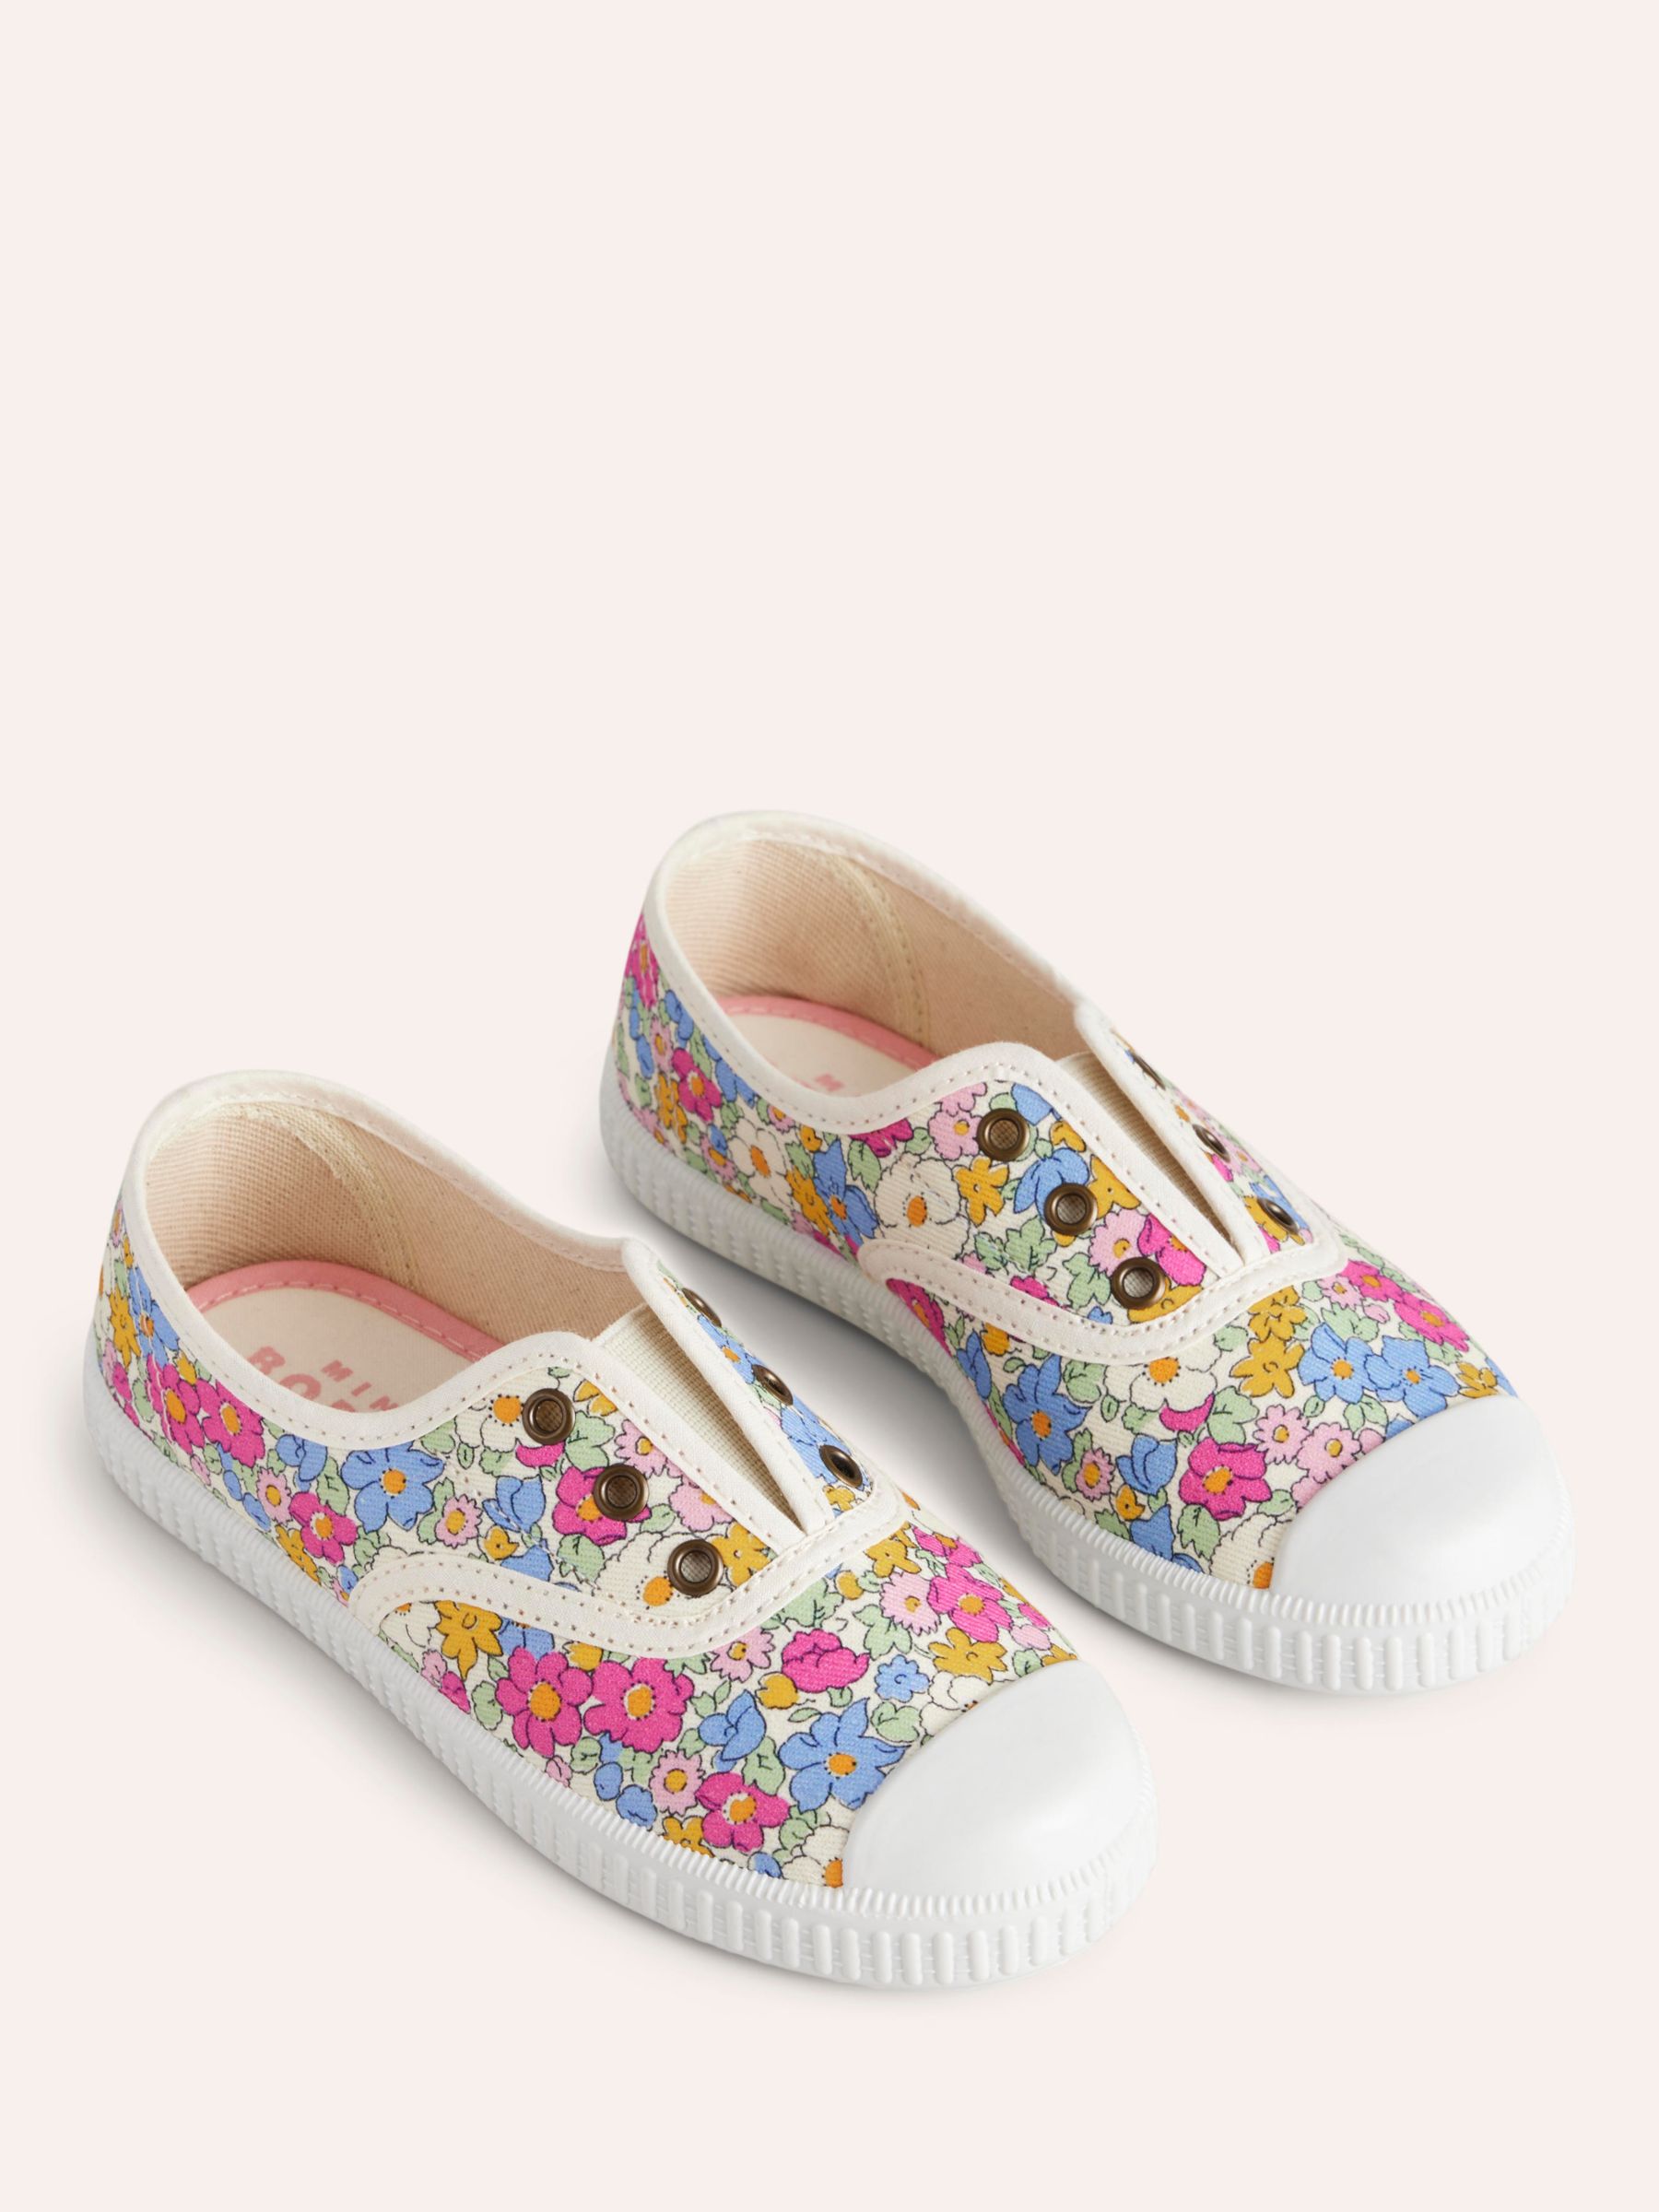 Mini Boden Kids' Canvas Laceless Floral Pull On Plimsolls, Pink Micro Floral, 7 Jnr